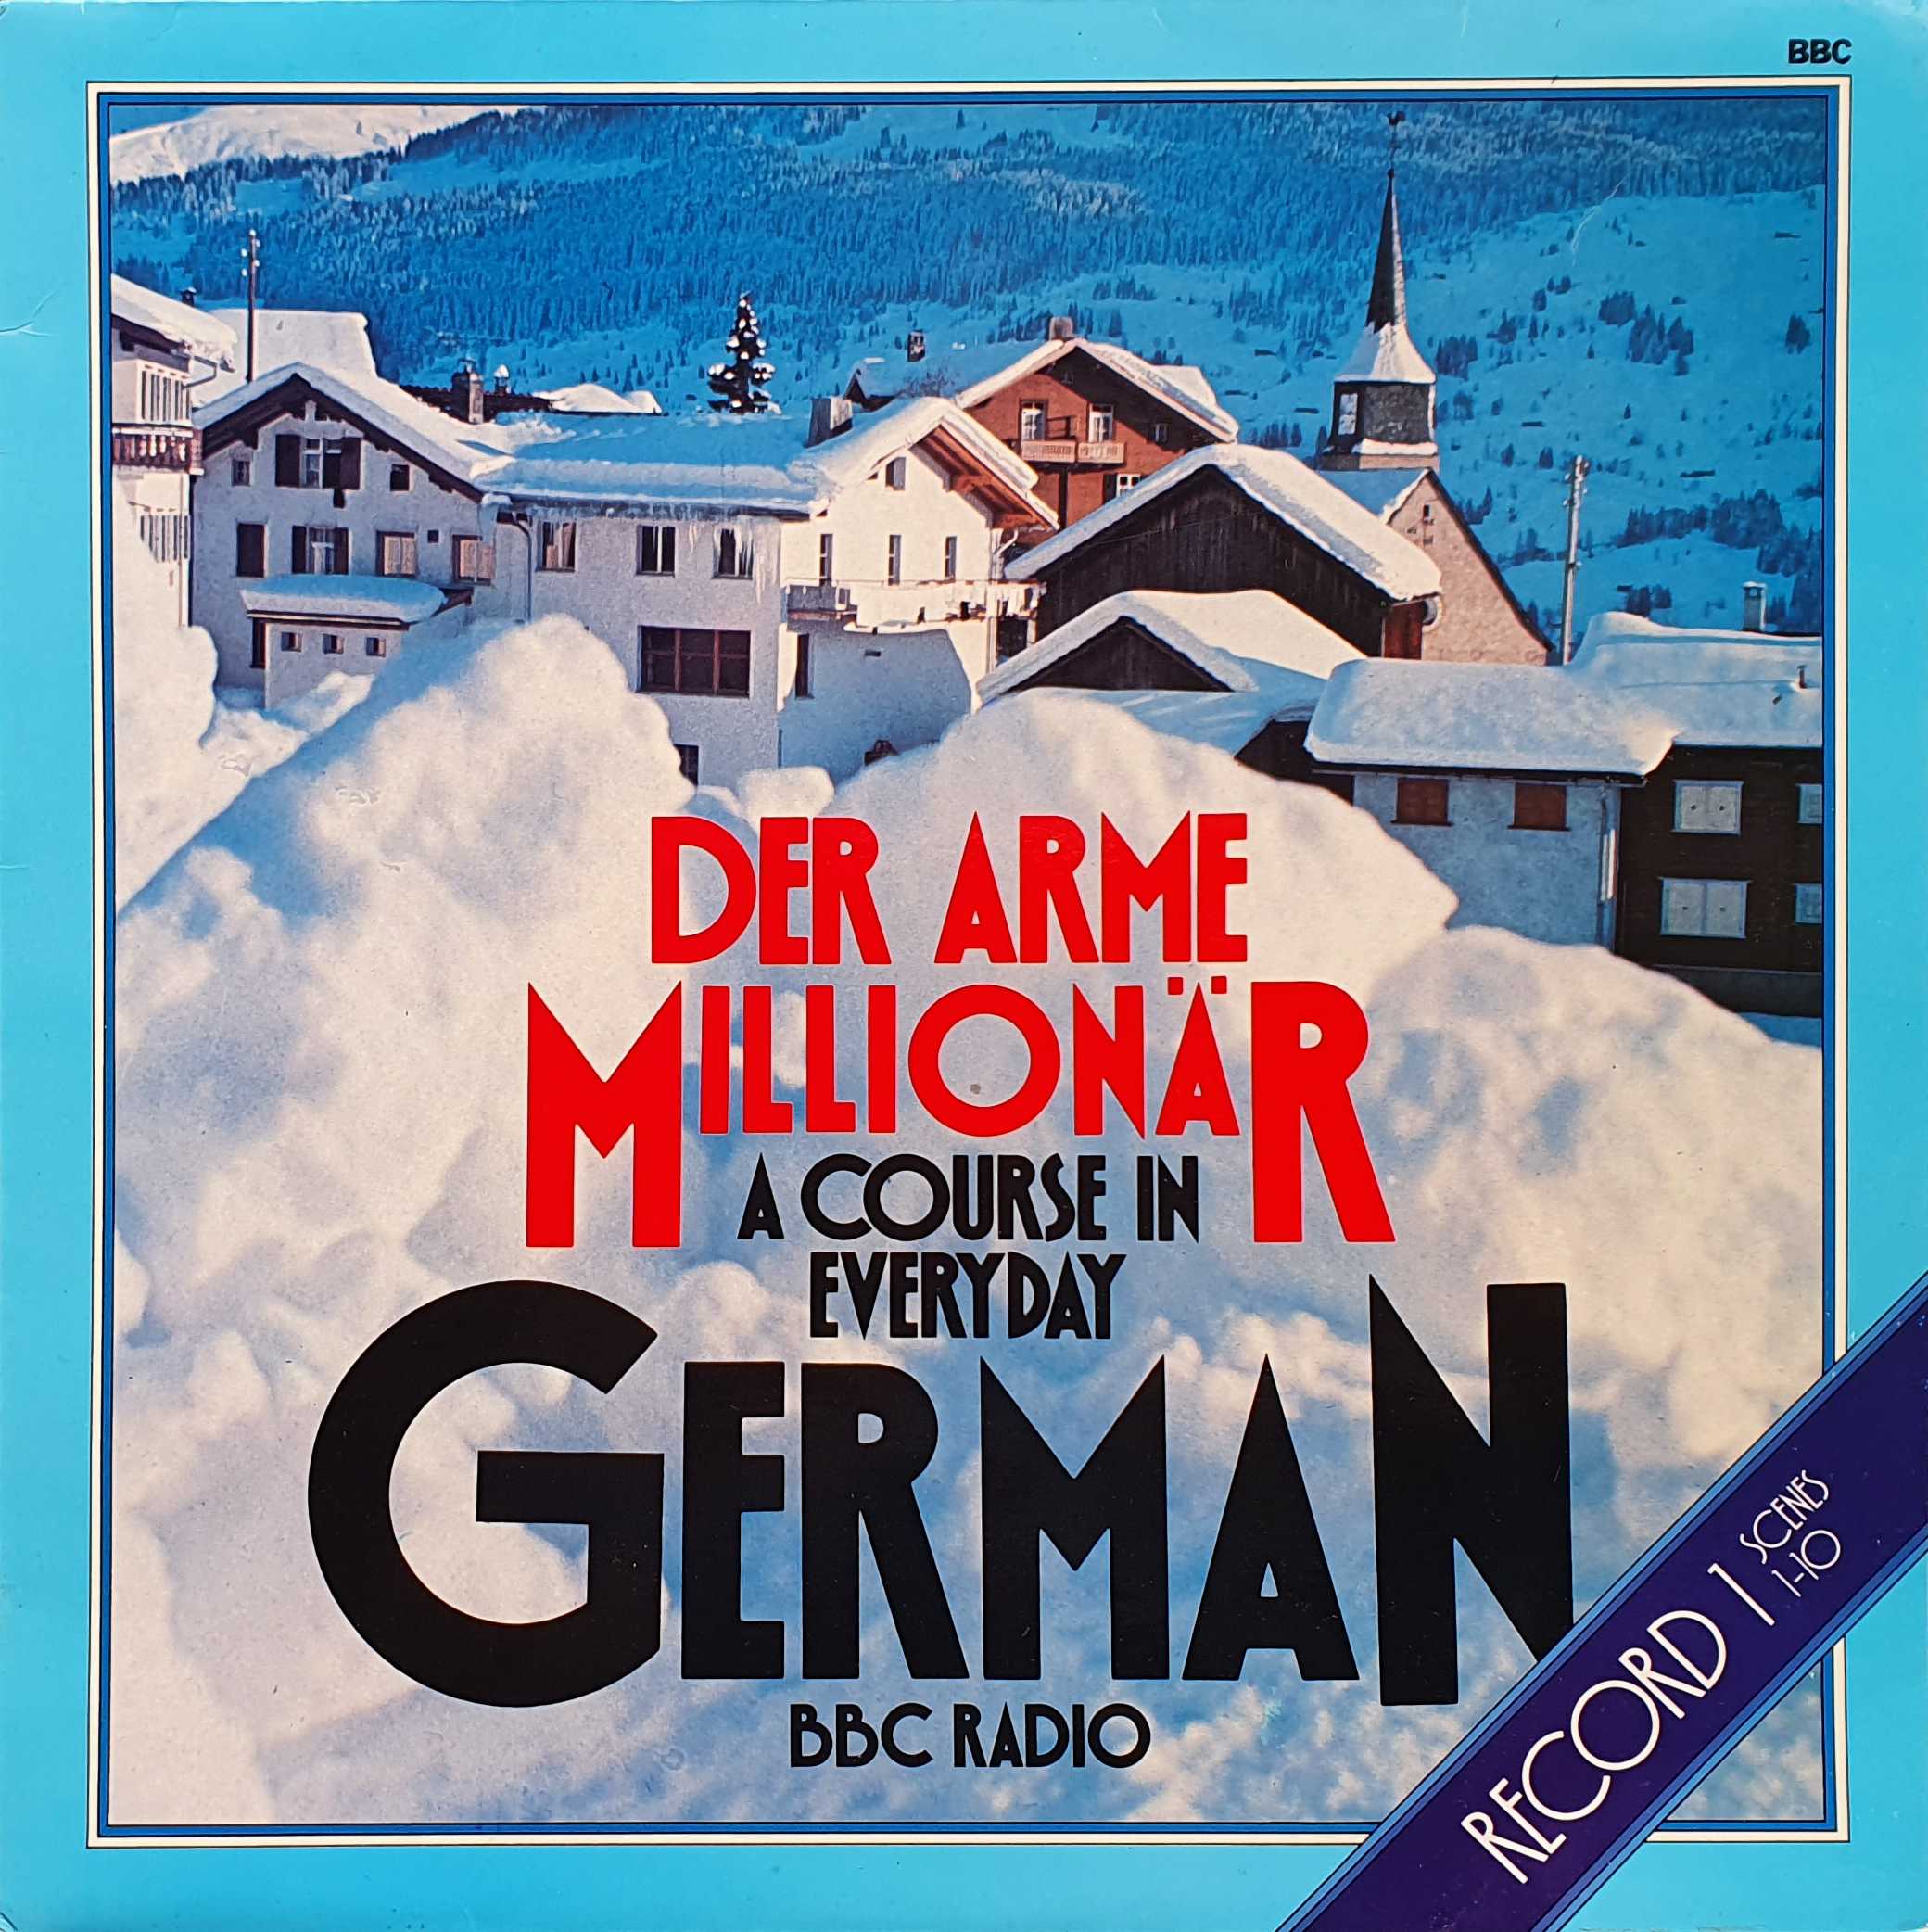 Picture of OP 113/114 Der Arme Million'a'r - A course in everyday German - Record 1 - Scenes 1 - 10 by artist Erich Kastner from the BBC albums - Records and Tapes library